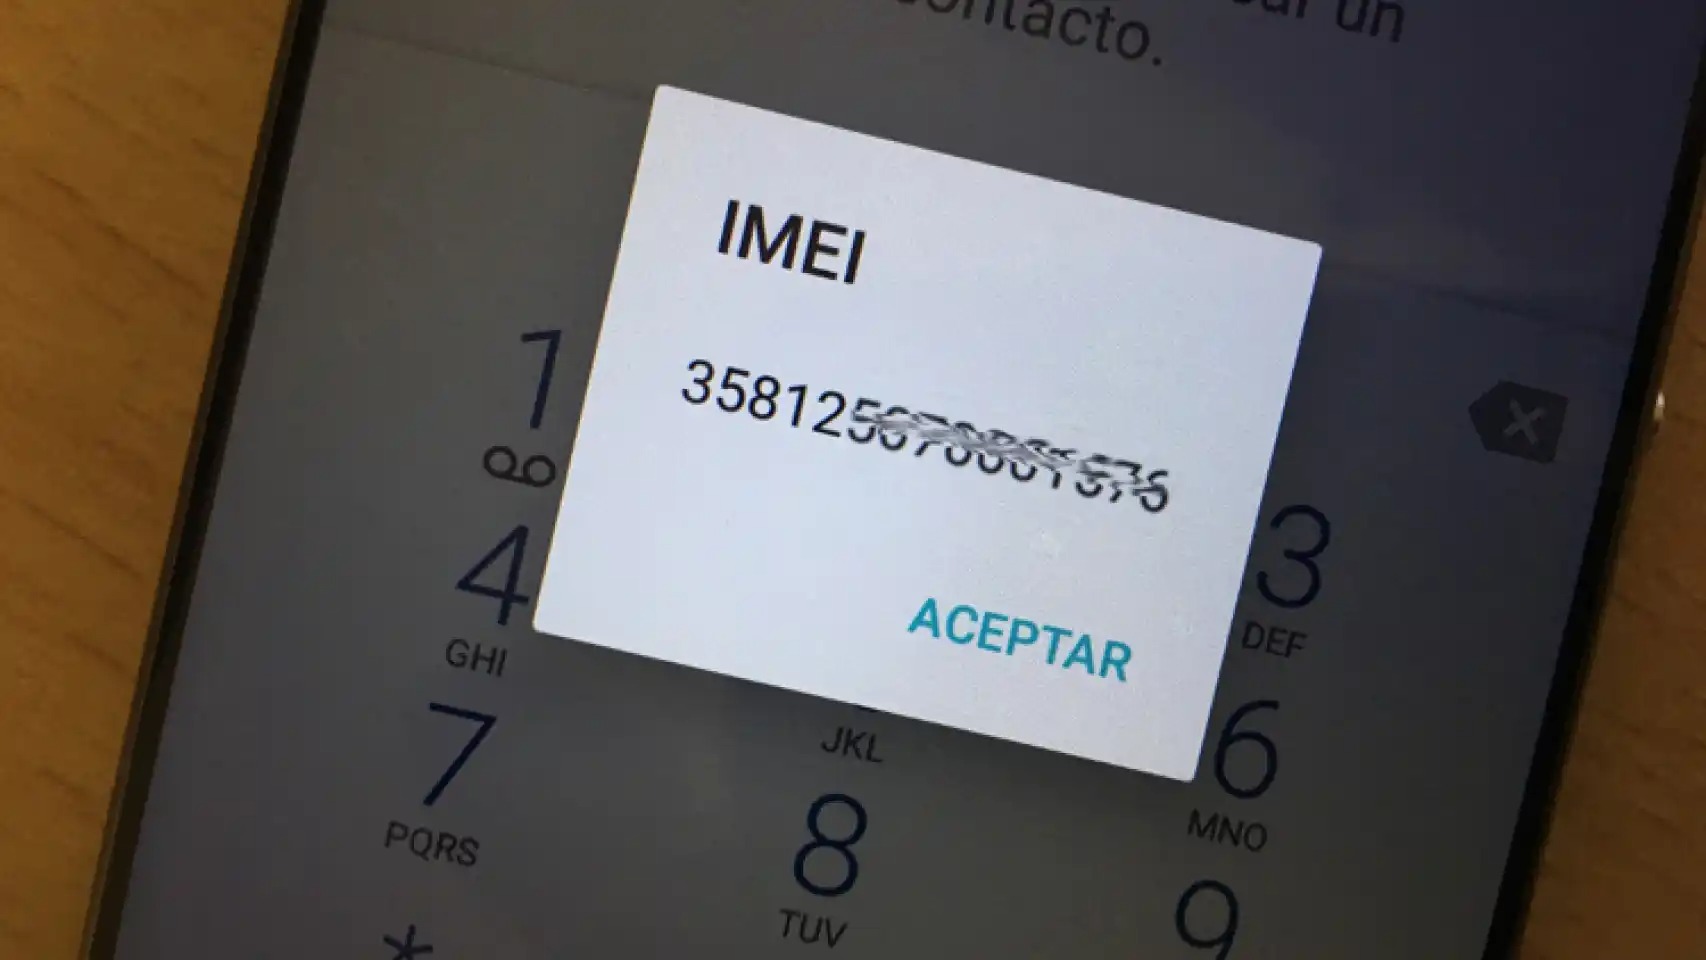 how-to-change-imei-number-on-phone